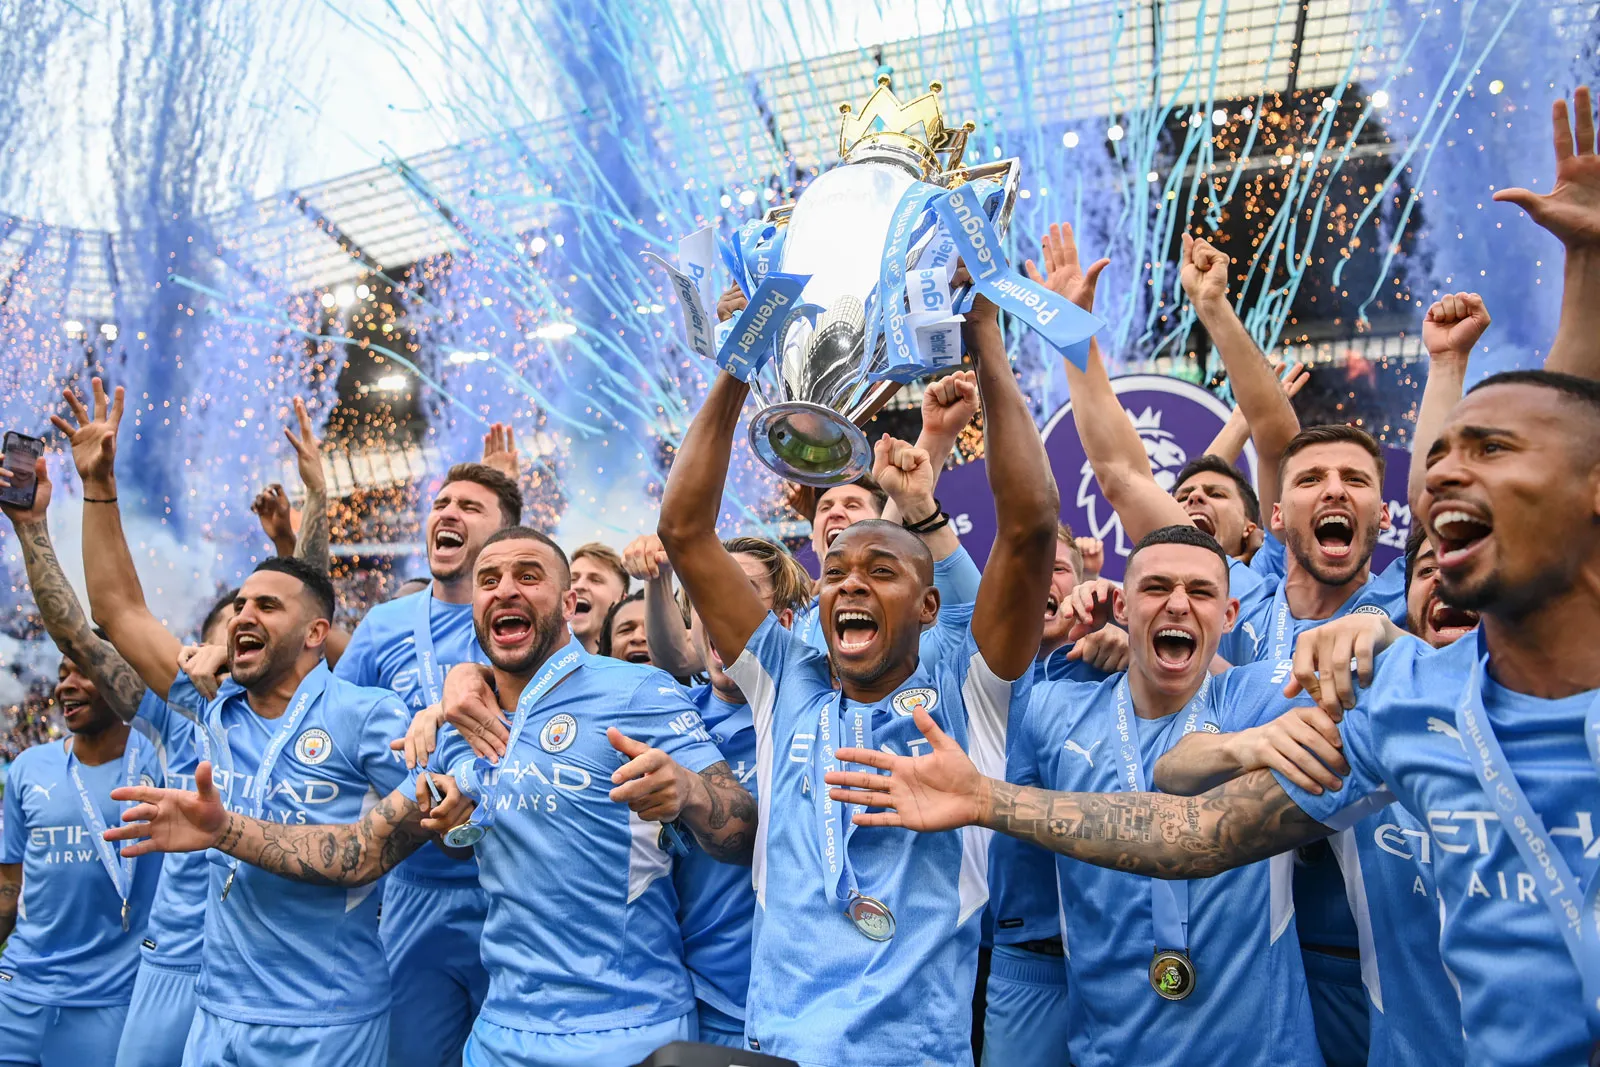 Manchester City are “throwing everything” at their legal battle with the Premier League because they “fear expulsion” in an